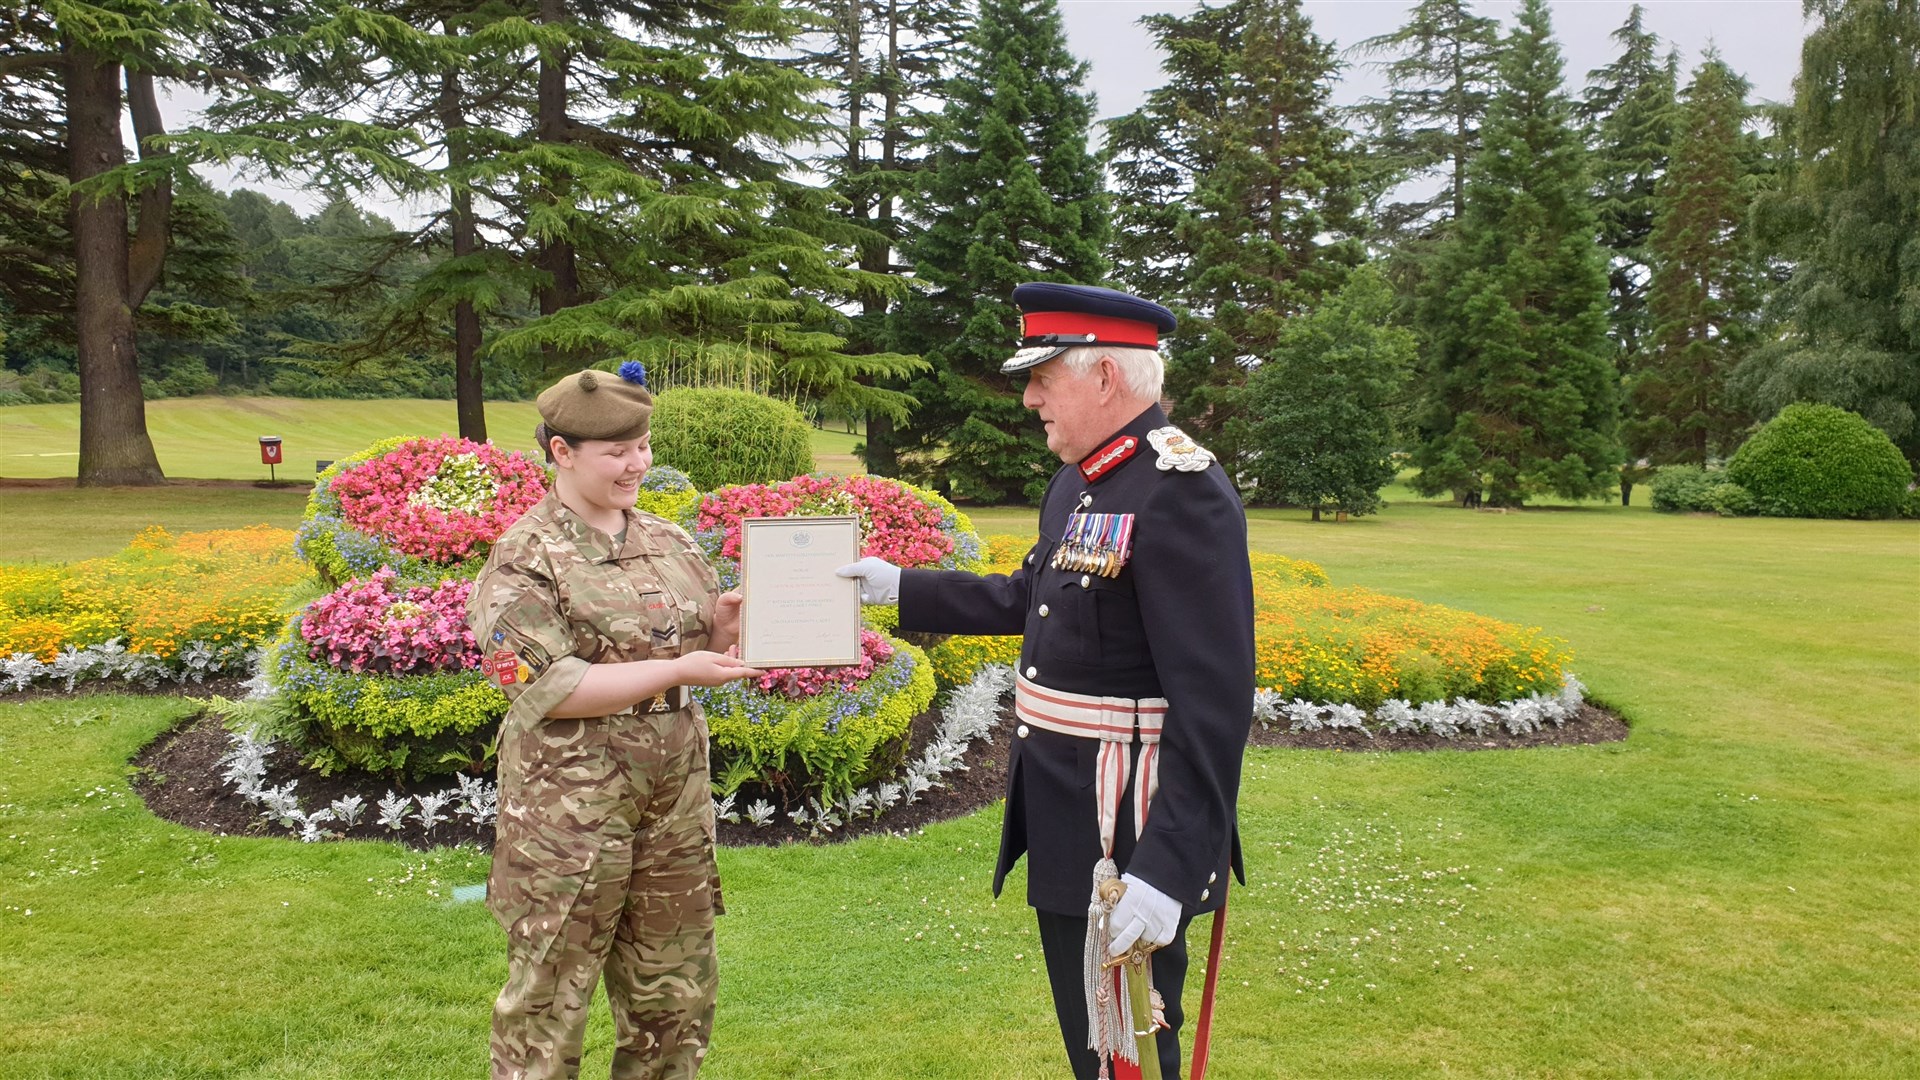 Cadet Corporal Bethany Young is appointed to the role of Lord Lieutenant’s Cadet of Moray by Lord Lieutenant Major General Seymour Munro during a presentation at Grant Park, in Forres.